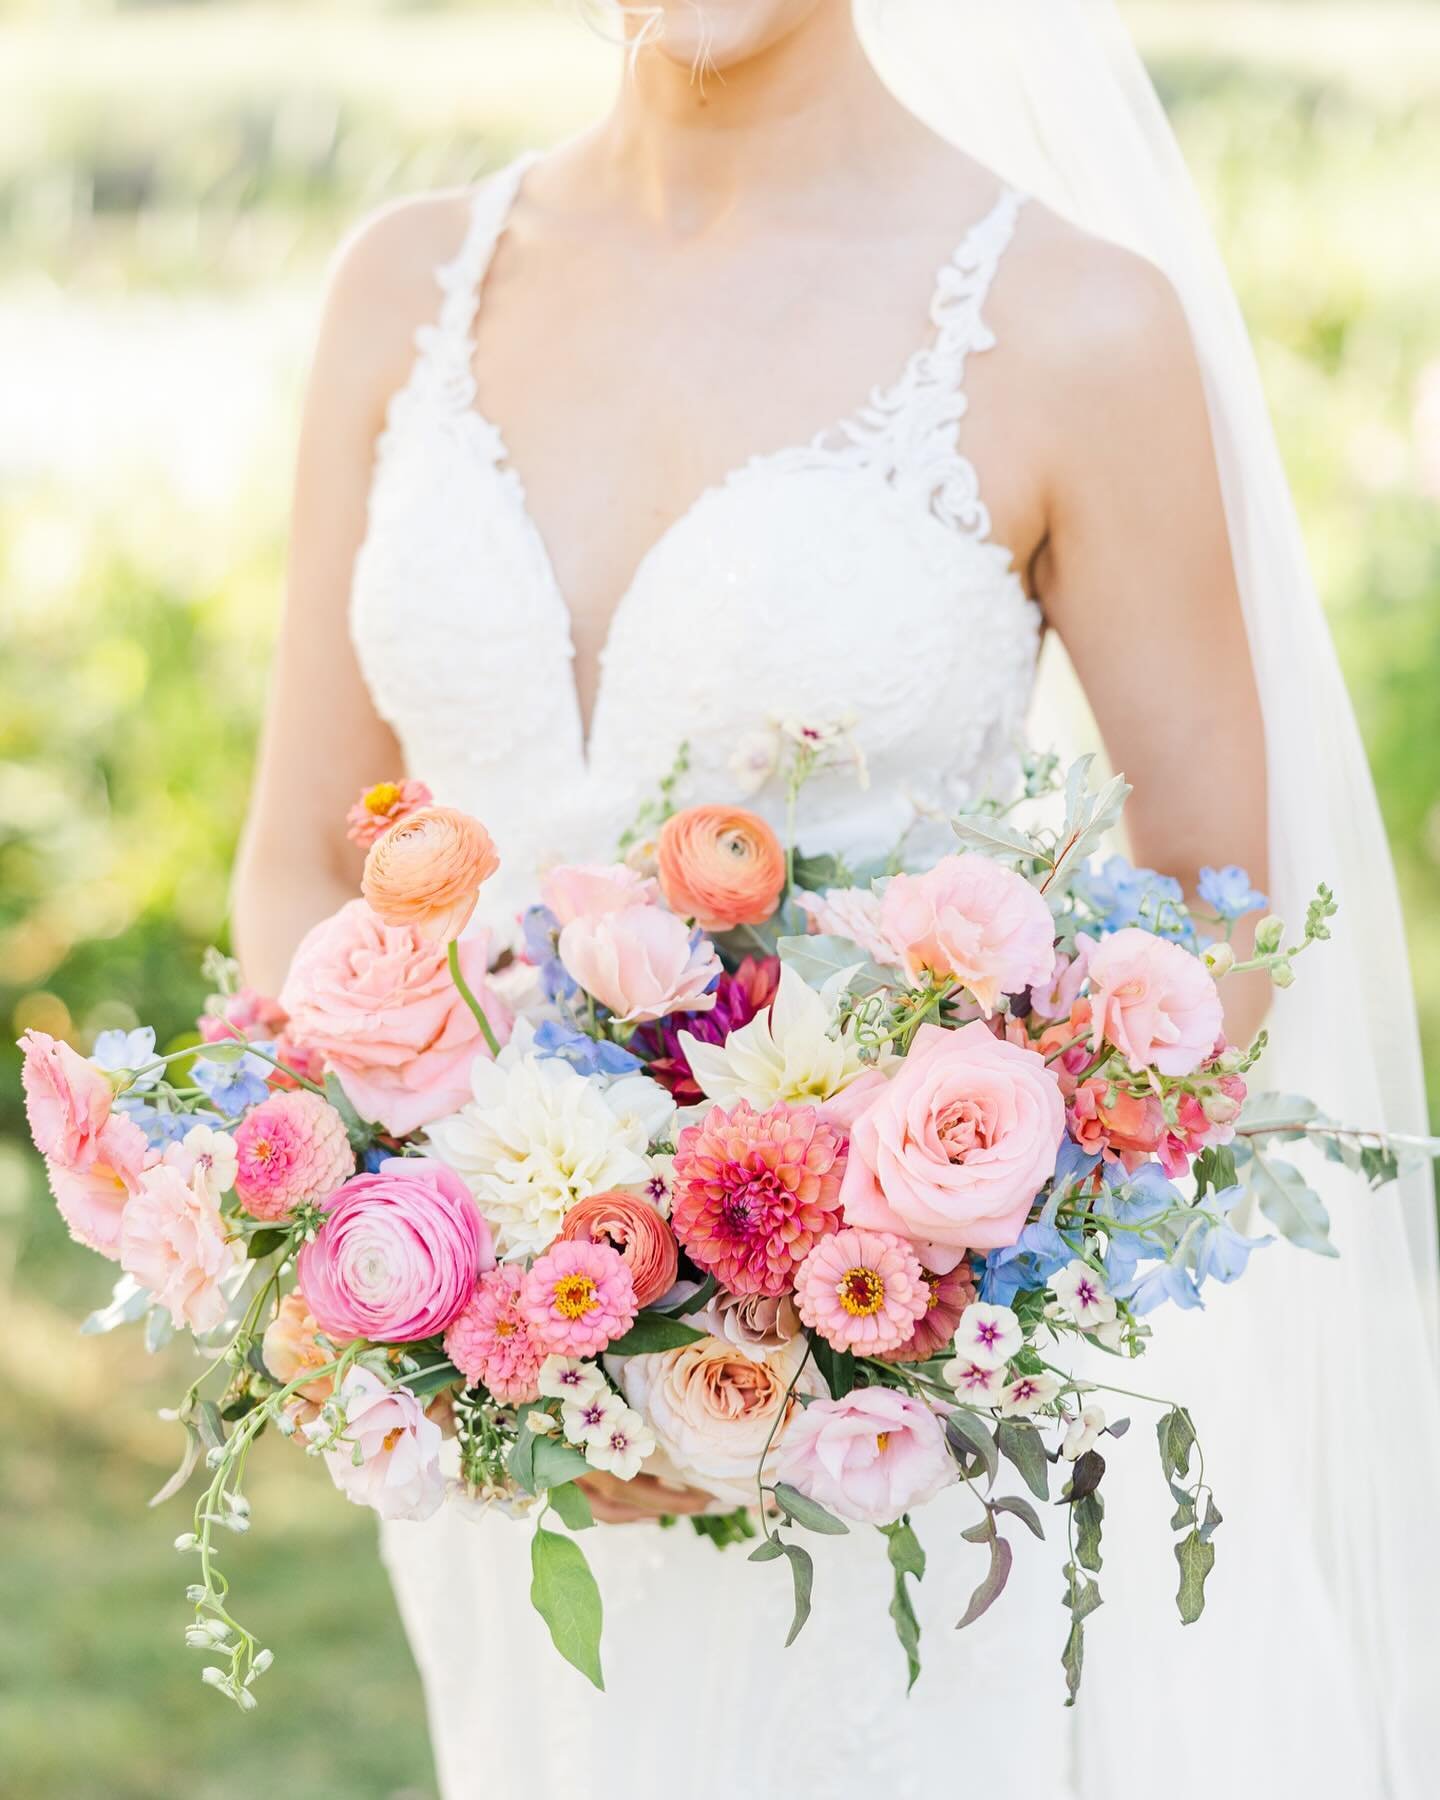 Bringing back this colorful and lush bouquet from a summer 2022 wedding &mdash; it&rsquo;s still one of my favorites!⁠
⁠
Venue: @florencegriswoldmuseum⁠
Florals: @stemsflowerdesign⁠
Hair: @jennagiannihair ⁠
Makeup: @faceforwardbyem⁠
Gown: @essenseofa